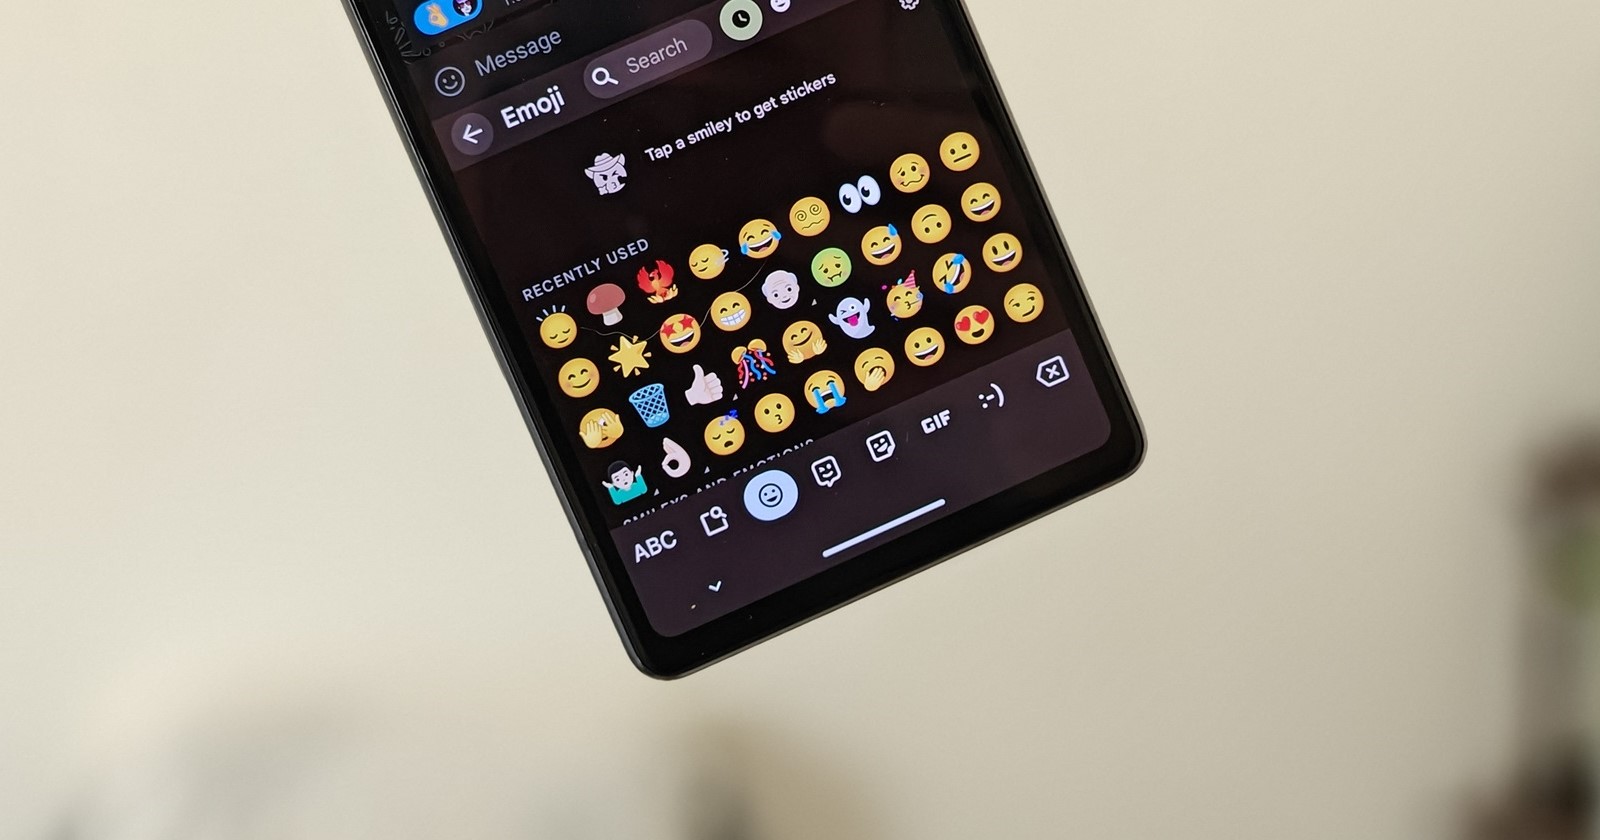 Gboard beta v13.8.03 update adds support for new Unicode 15.1 and Emoji 15.1 on Pixel devices